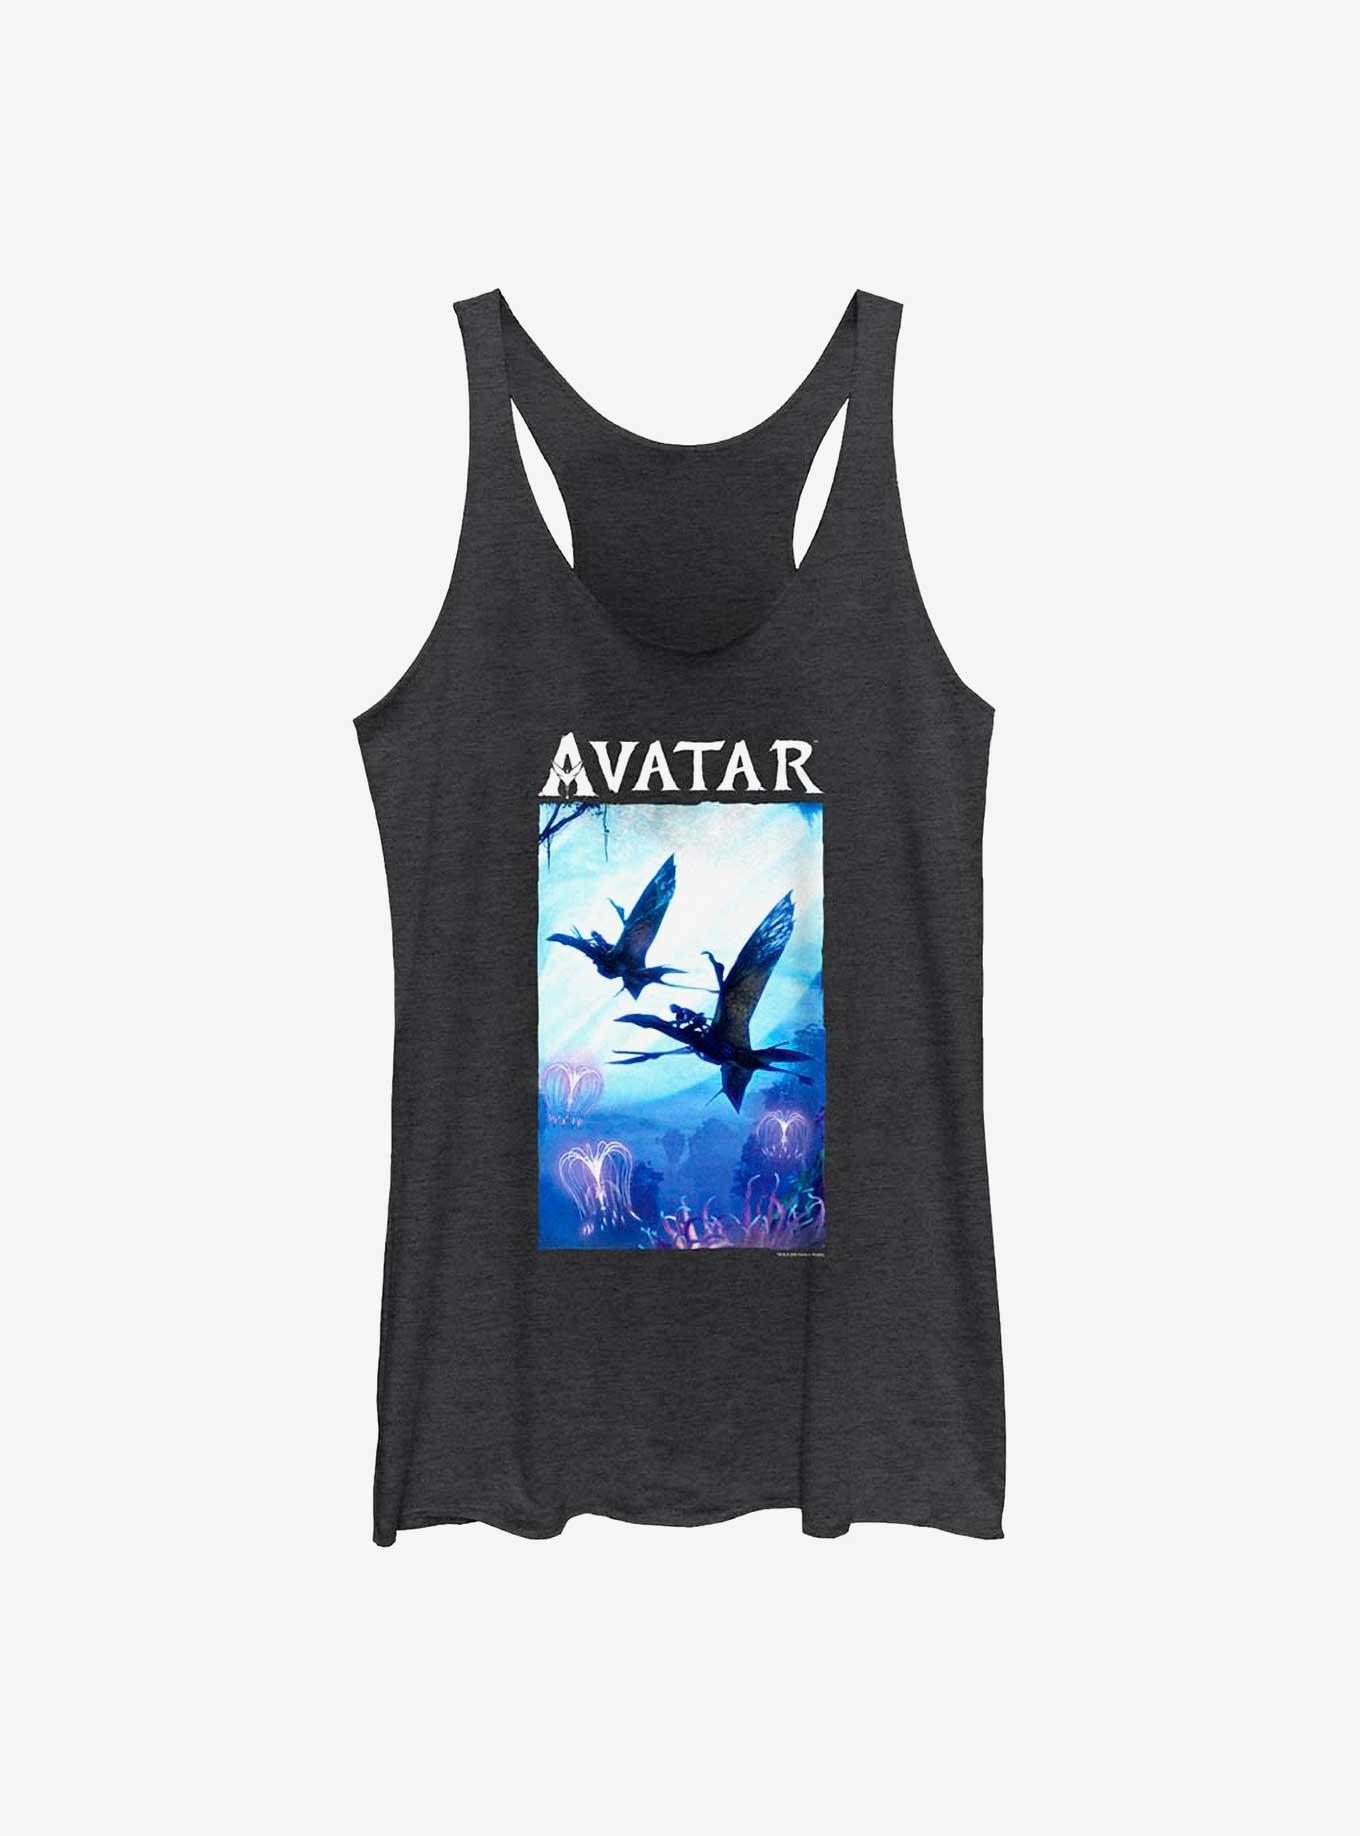 Avatar: The Way of Water Air Time Poster Girls Tank